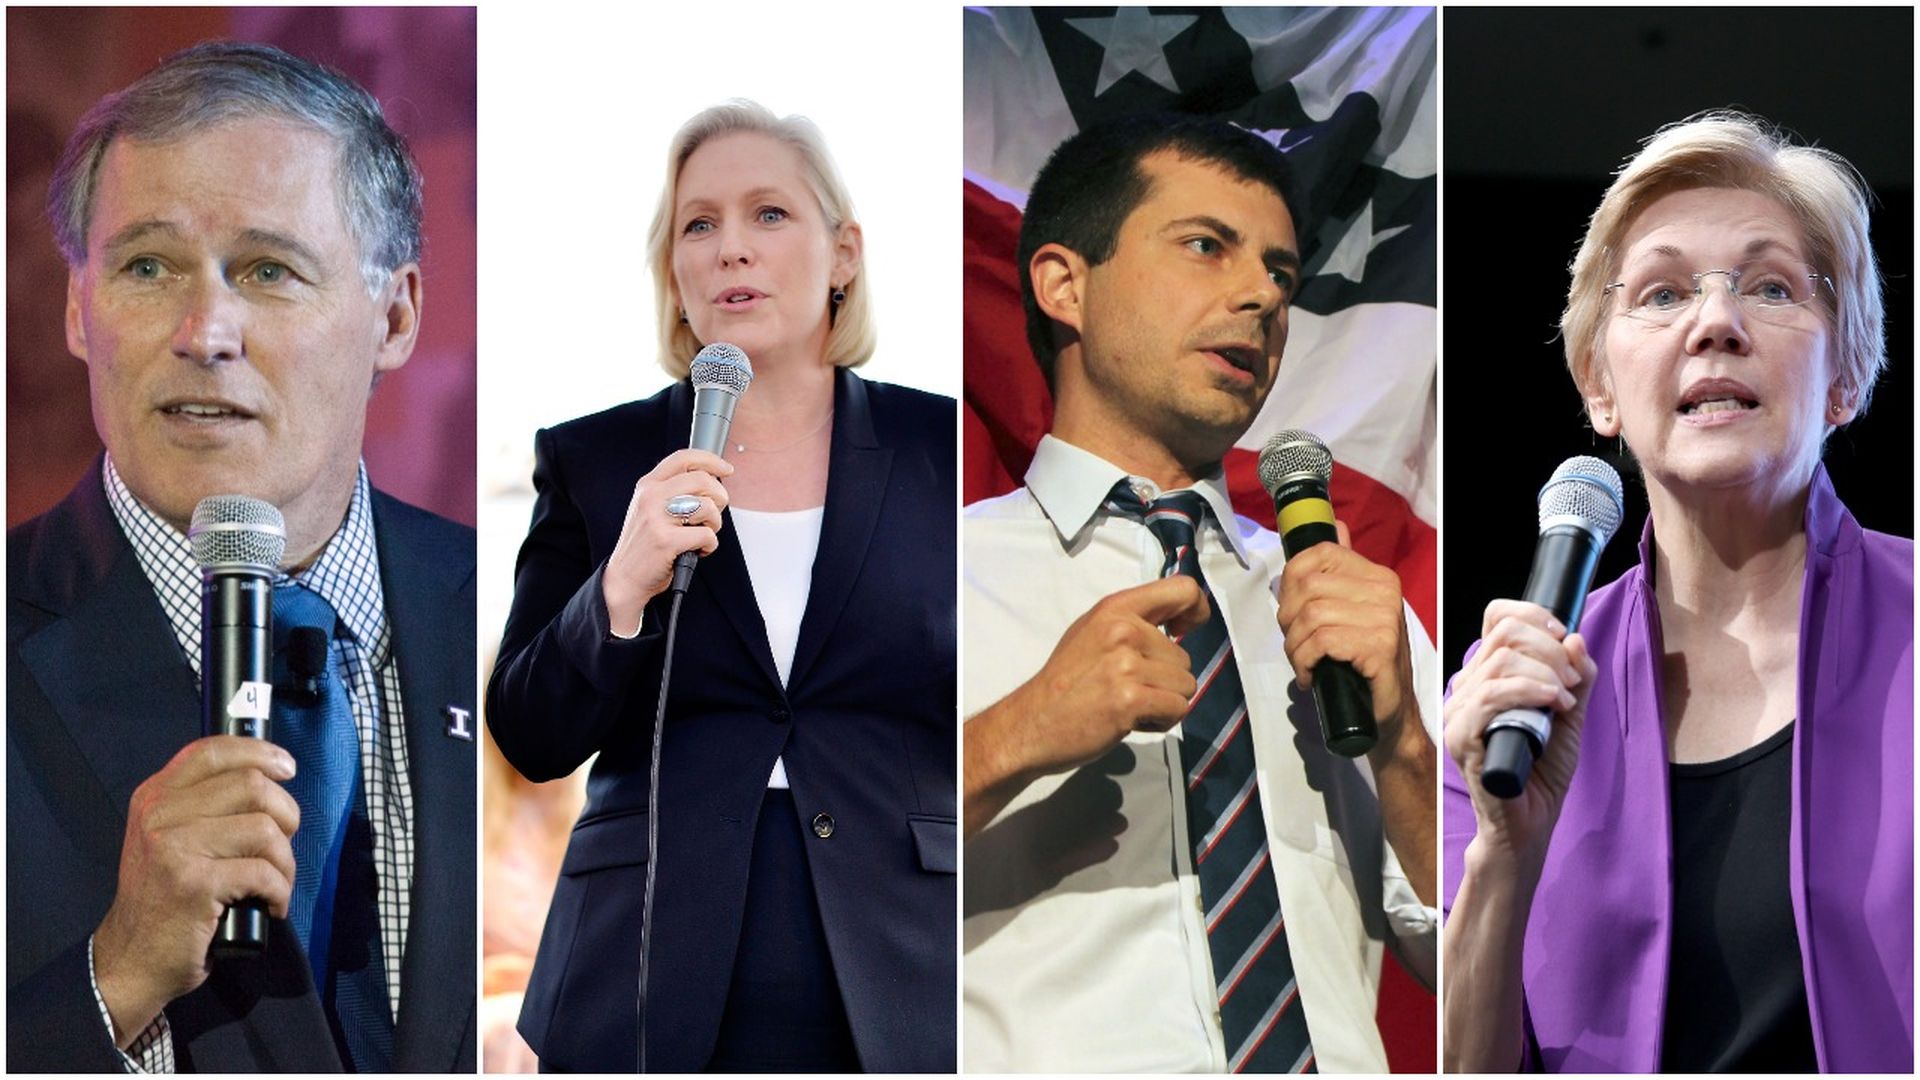 This image is a four-way split screen of Democratic candidates in this order, from left to right: Inslee, Gillibrand, Buttigieg, and Warren.